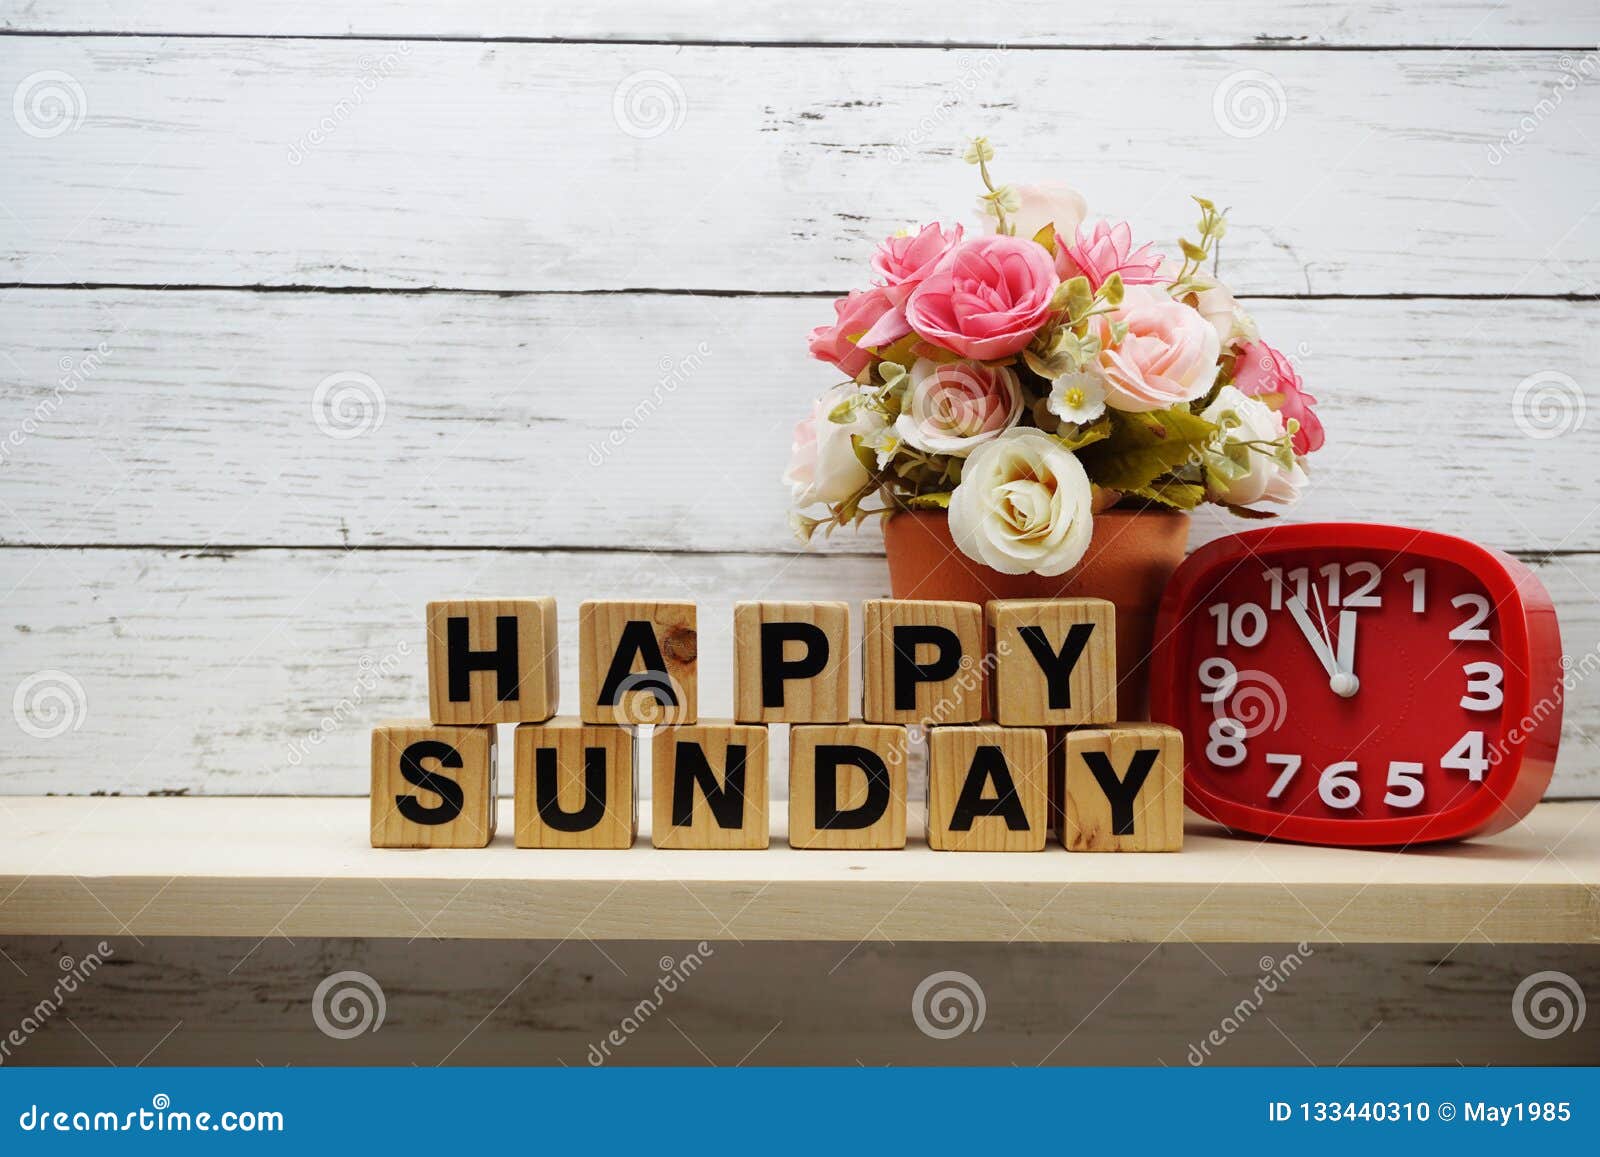 Happy Sunday Wooden Letter Alphabet with Decorate Item on Wooden ...